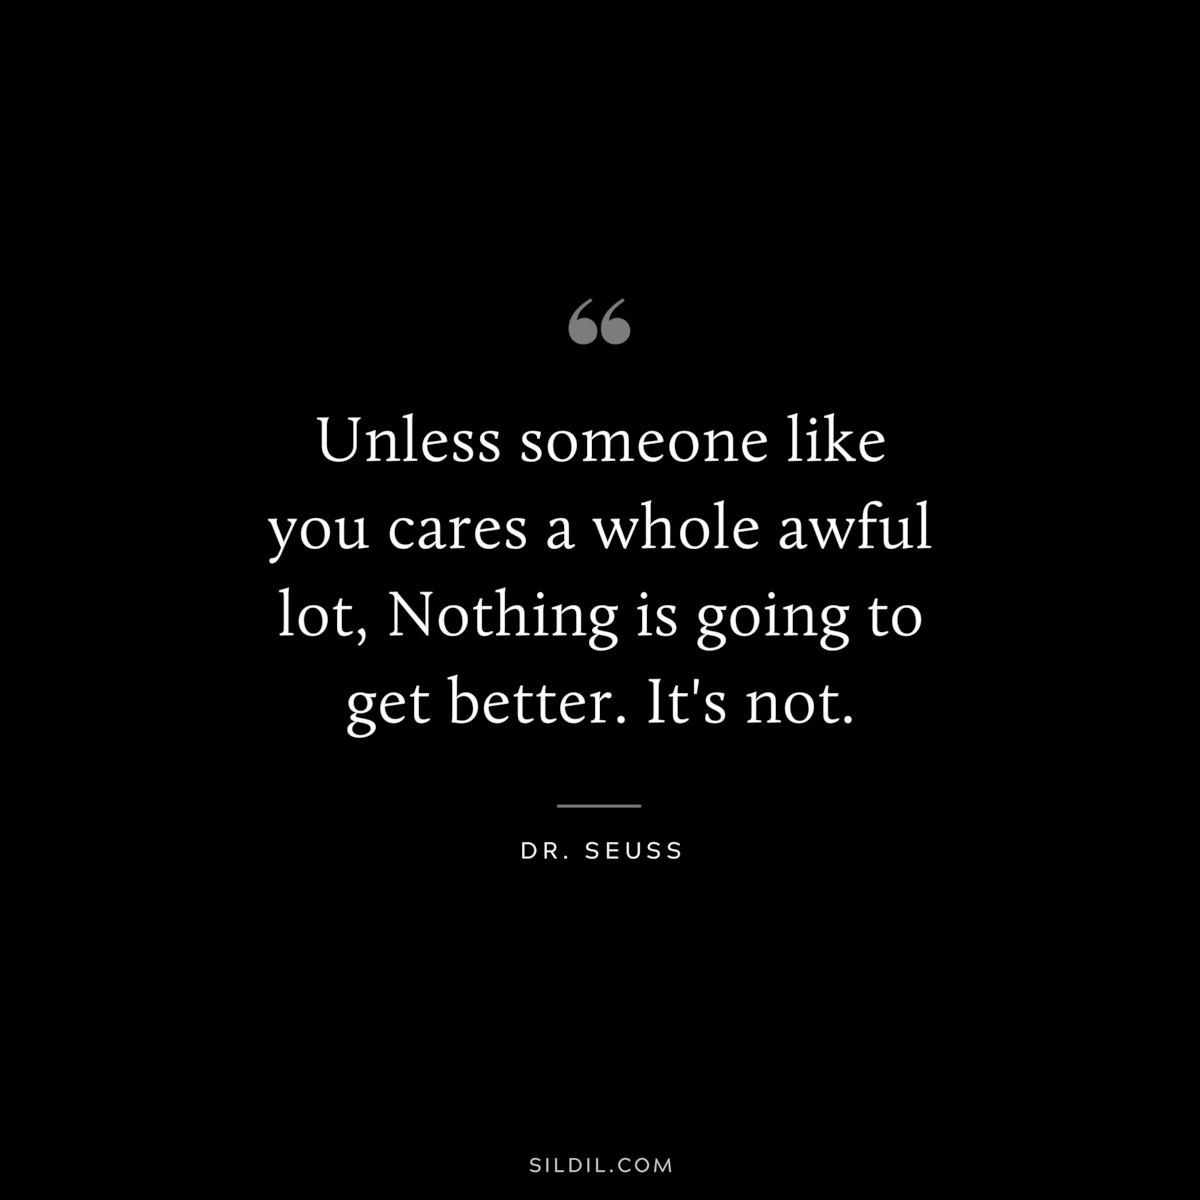 Unless someone like you cares a whole awful lot, Nothing is going to get better. It's not. ― Dr. Seuss